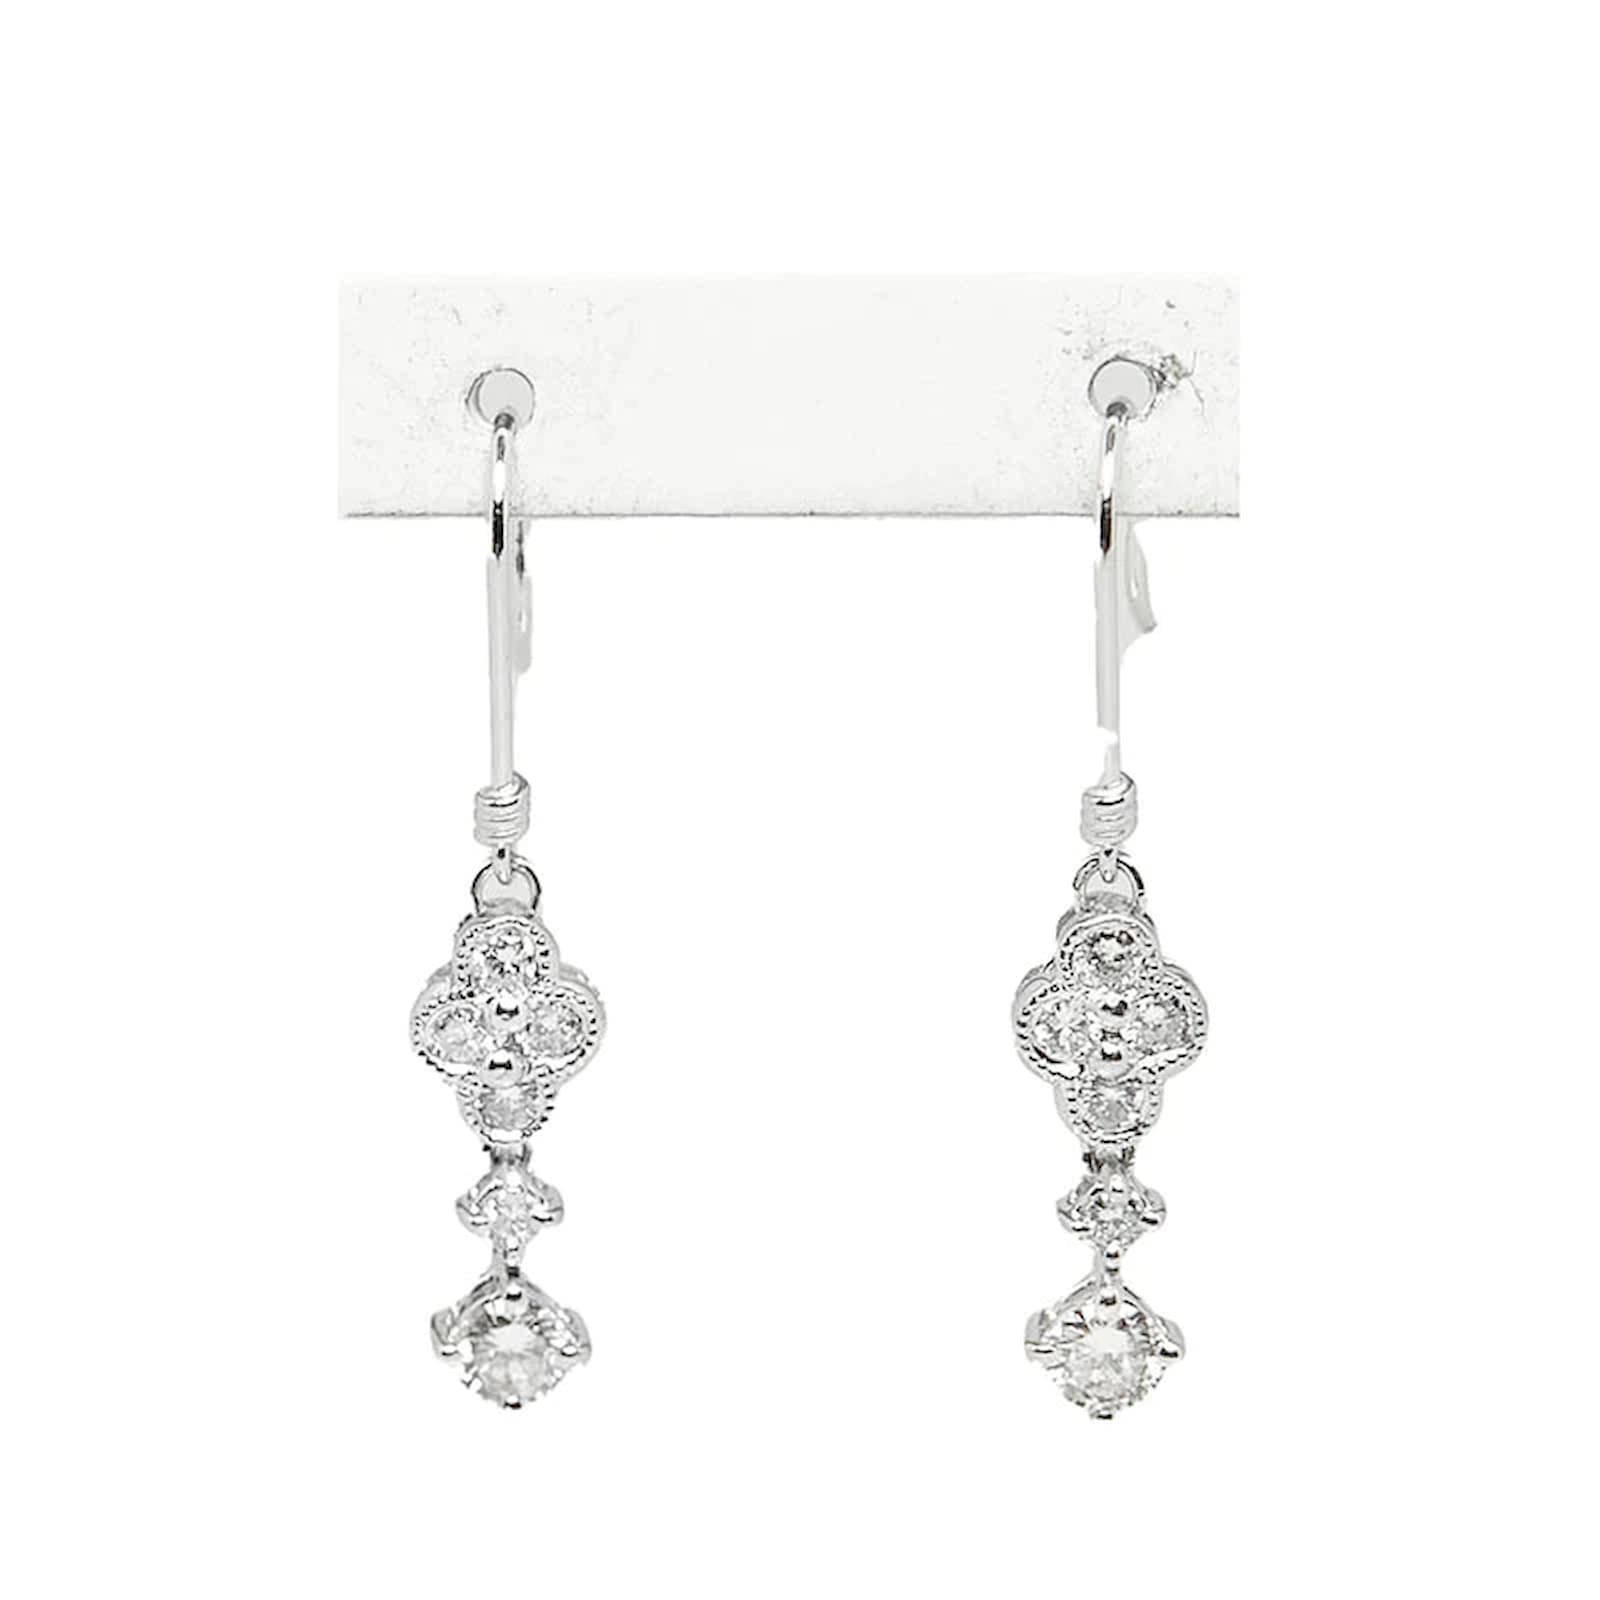 Color Blossom Long Earrings, White Gold And Diamonds - Jewelry - Categories